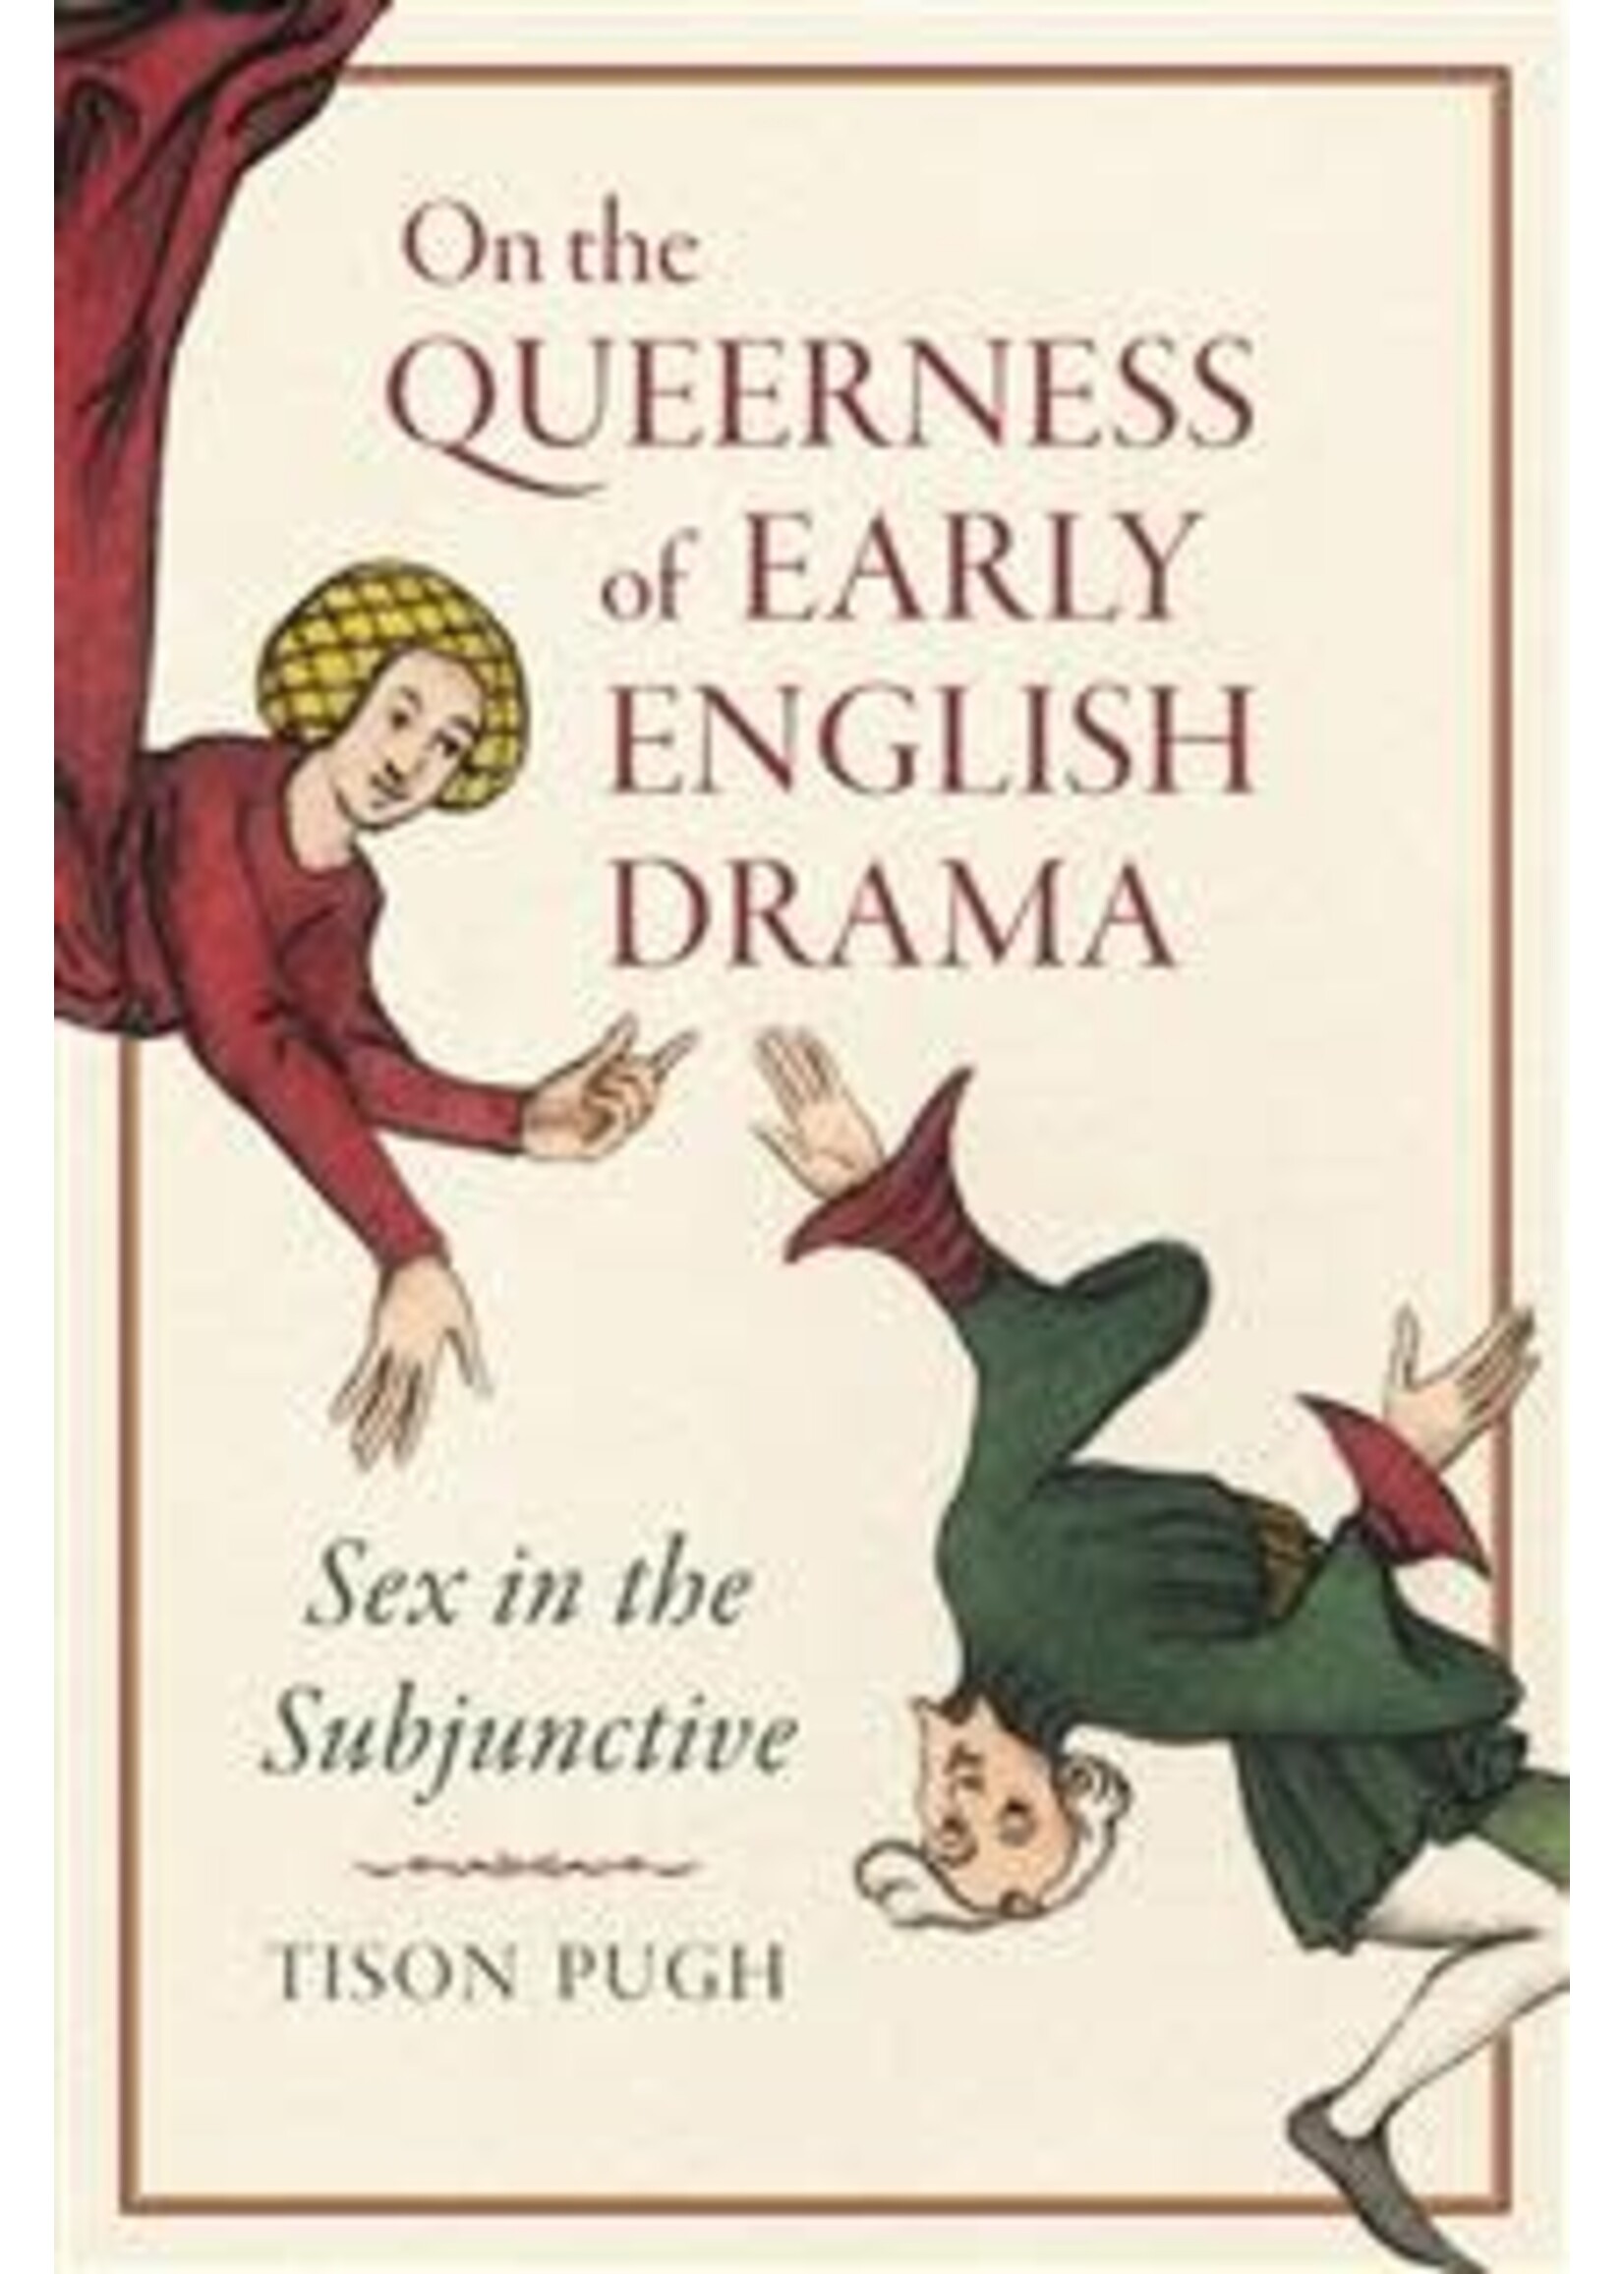 On the Queerness of Early English Drama: Sex in the Subjunctive by Tison Pugh